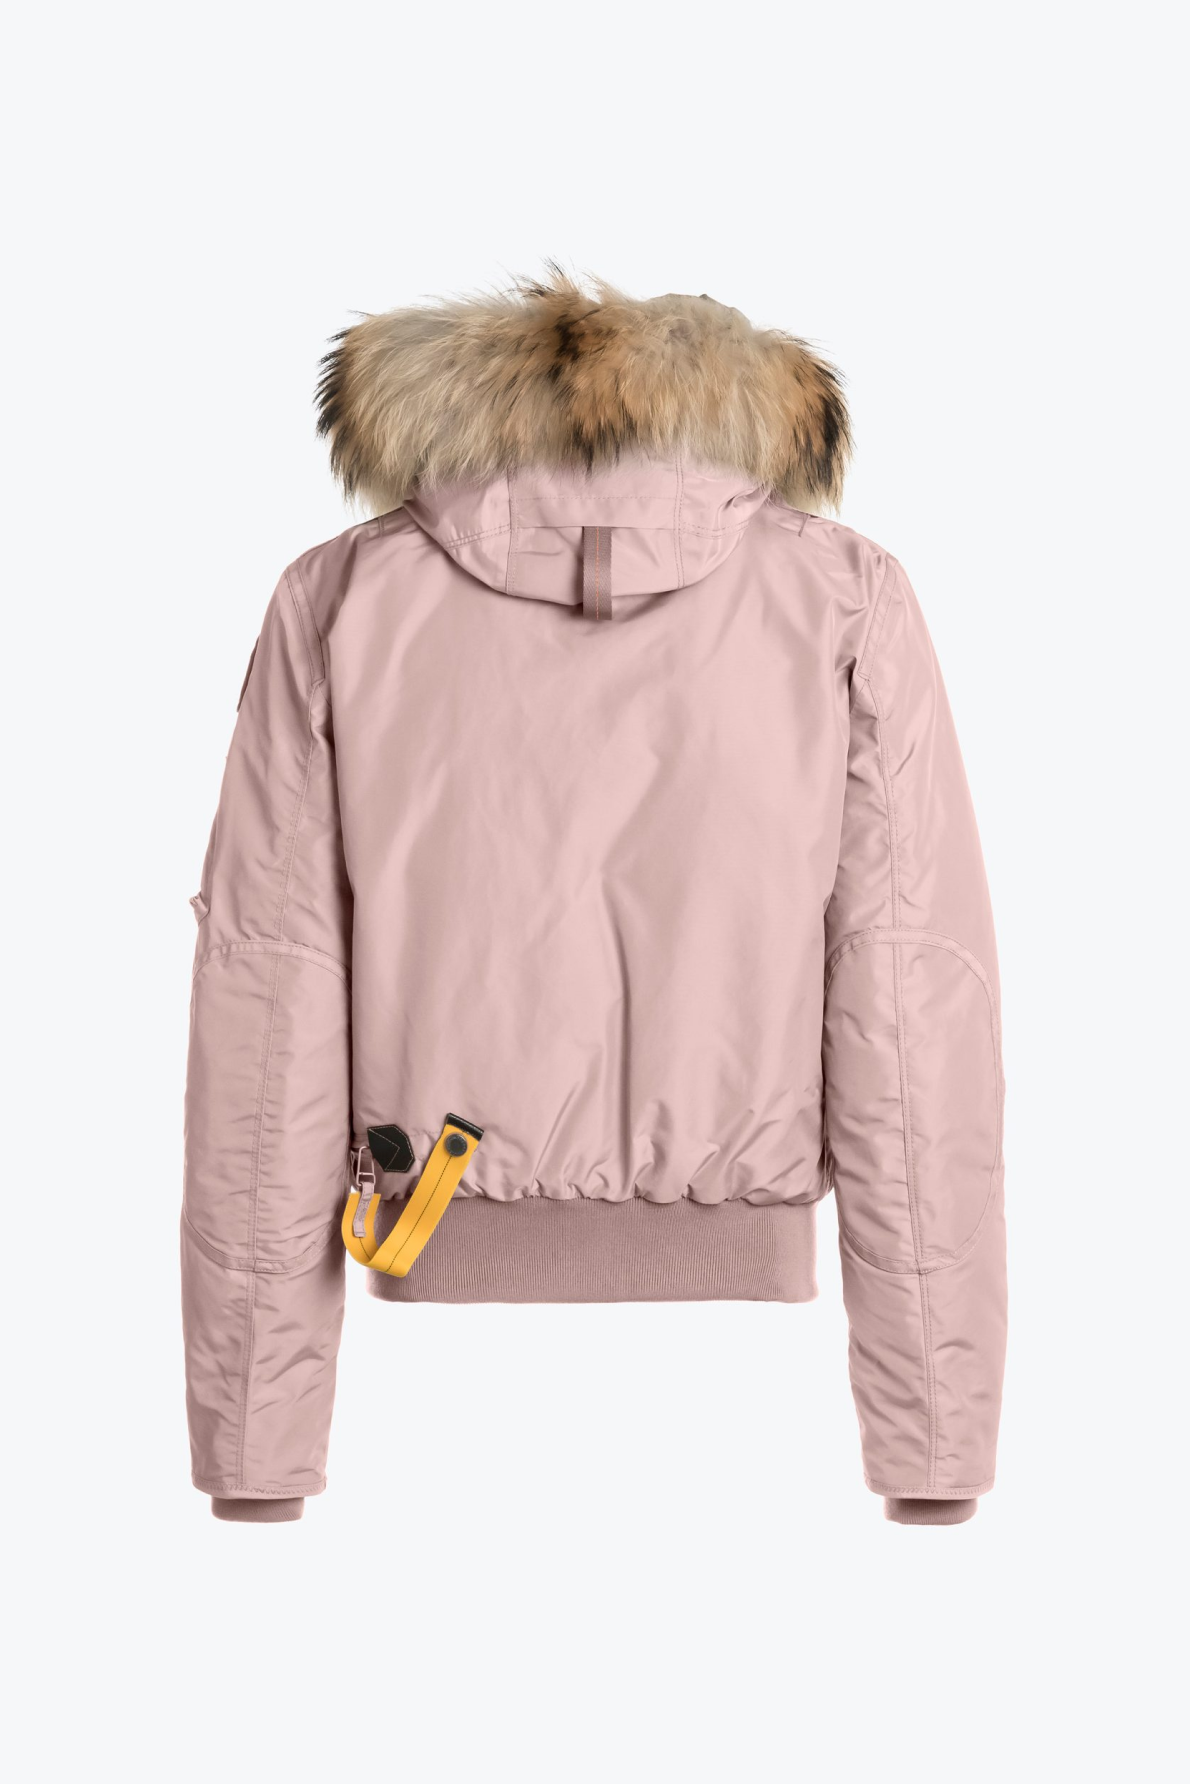 Parajumpers Gobi Women's Hooded Bomber Jacket Pink - Back View